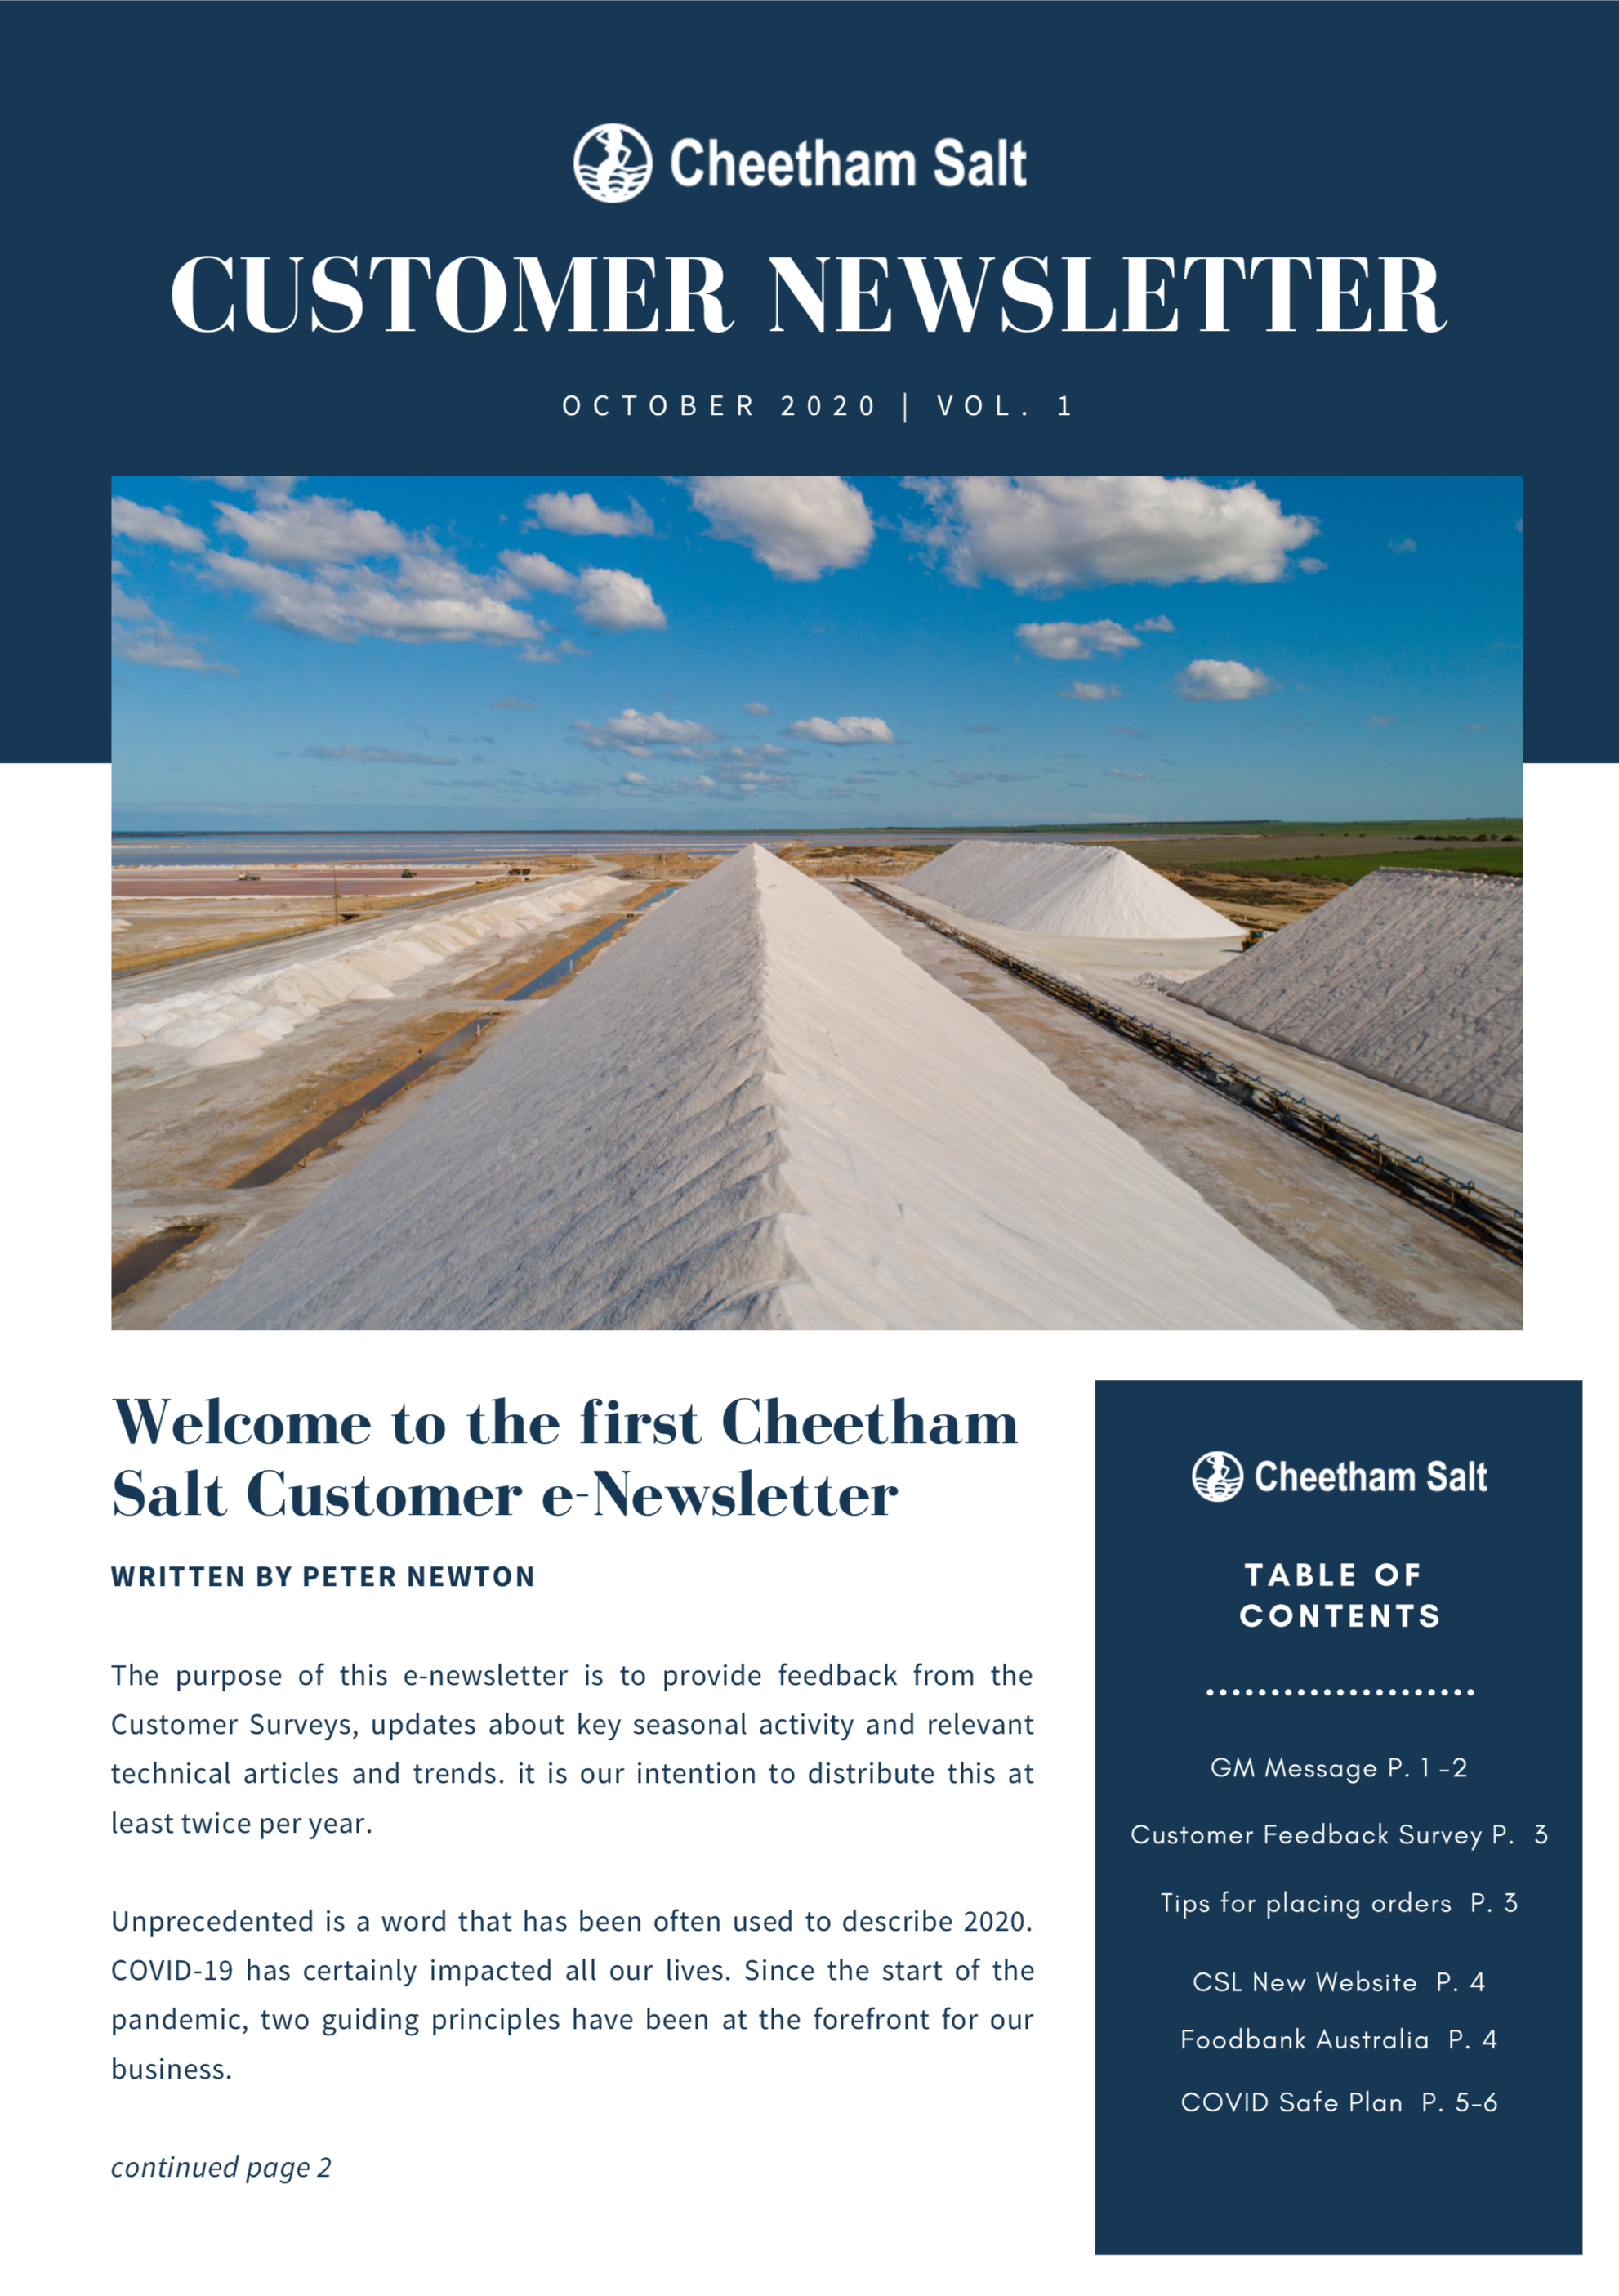 October 2020 Customer Newsletter. The customer newsletter includes an image, a short piece of text, and a table of contents.